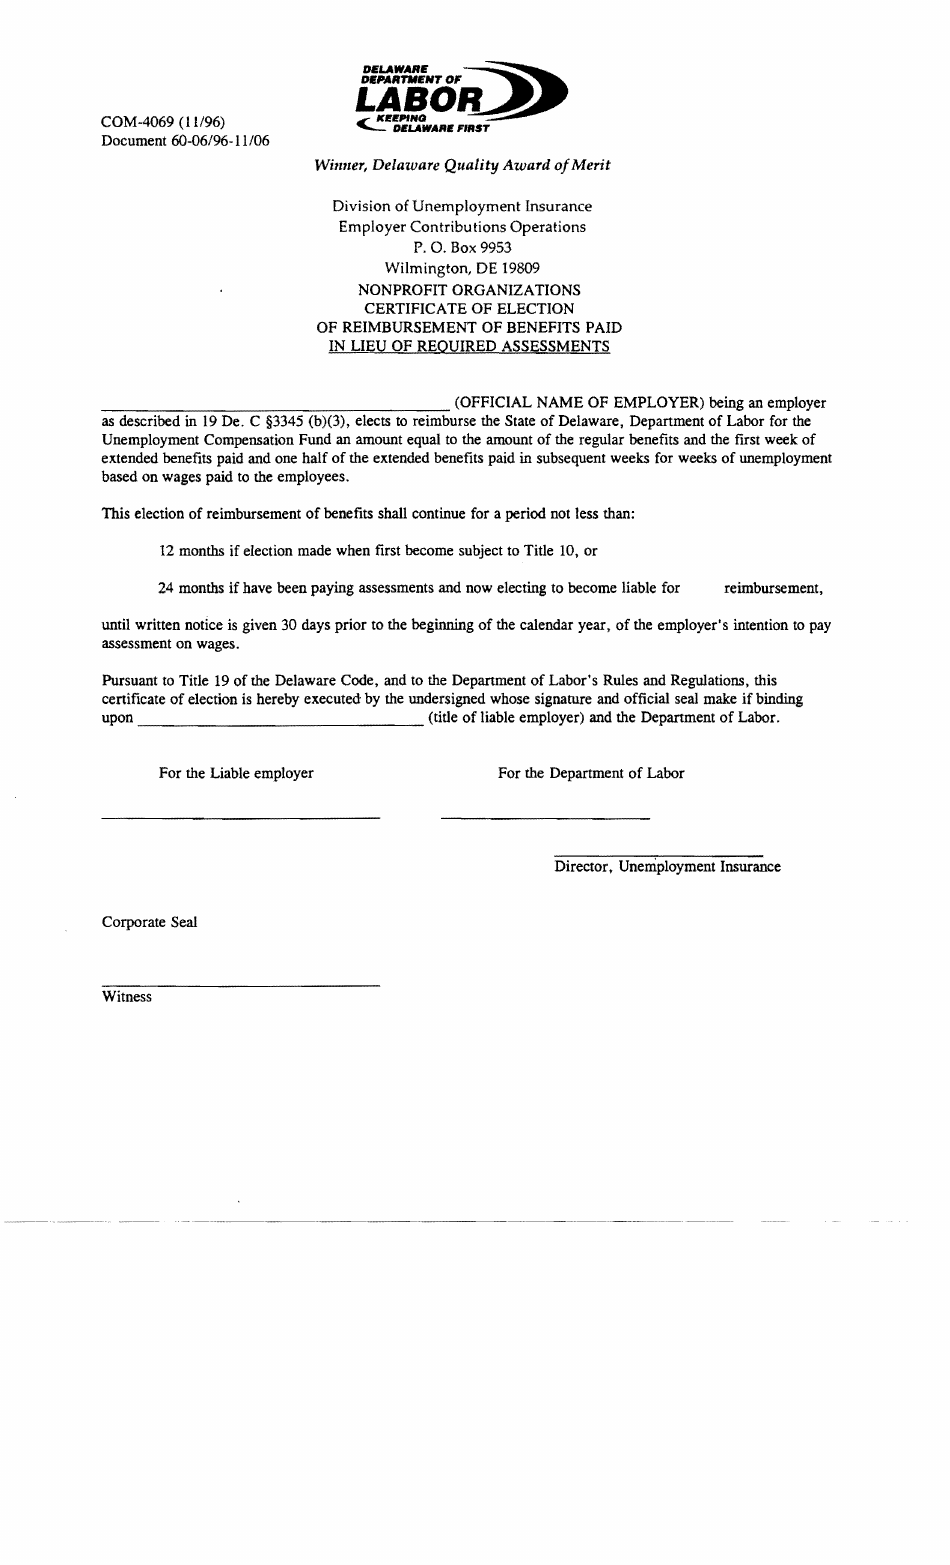 Form COM-4069 Nonprofit Organizations Certificate of Election of Reimbursement of Benefits Paid in Lieu of Required Assessments - Delaware, Page 1